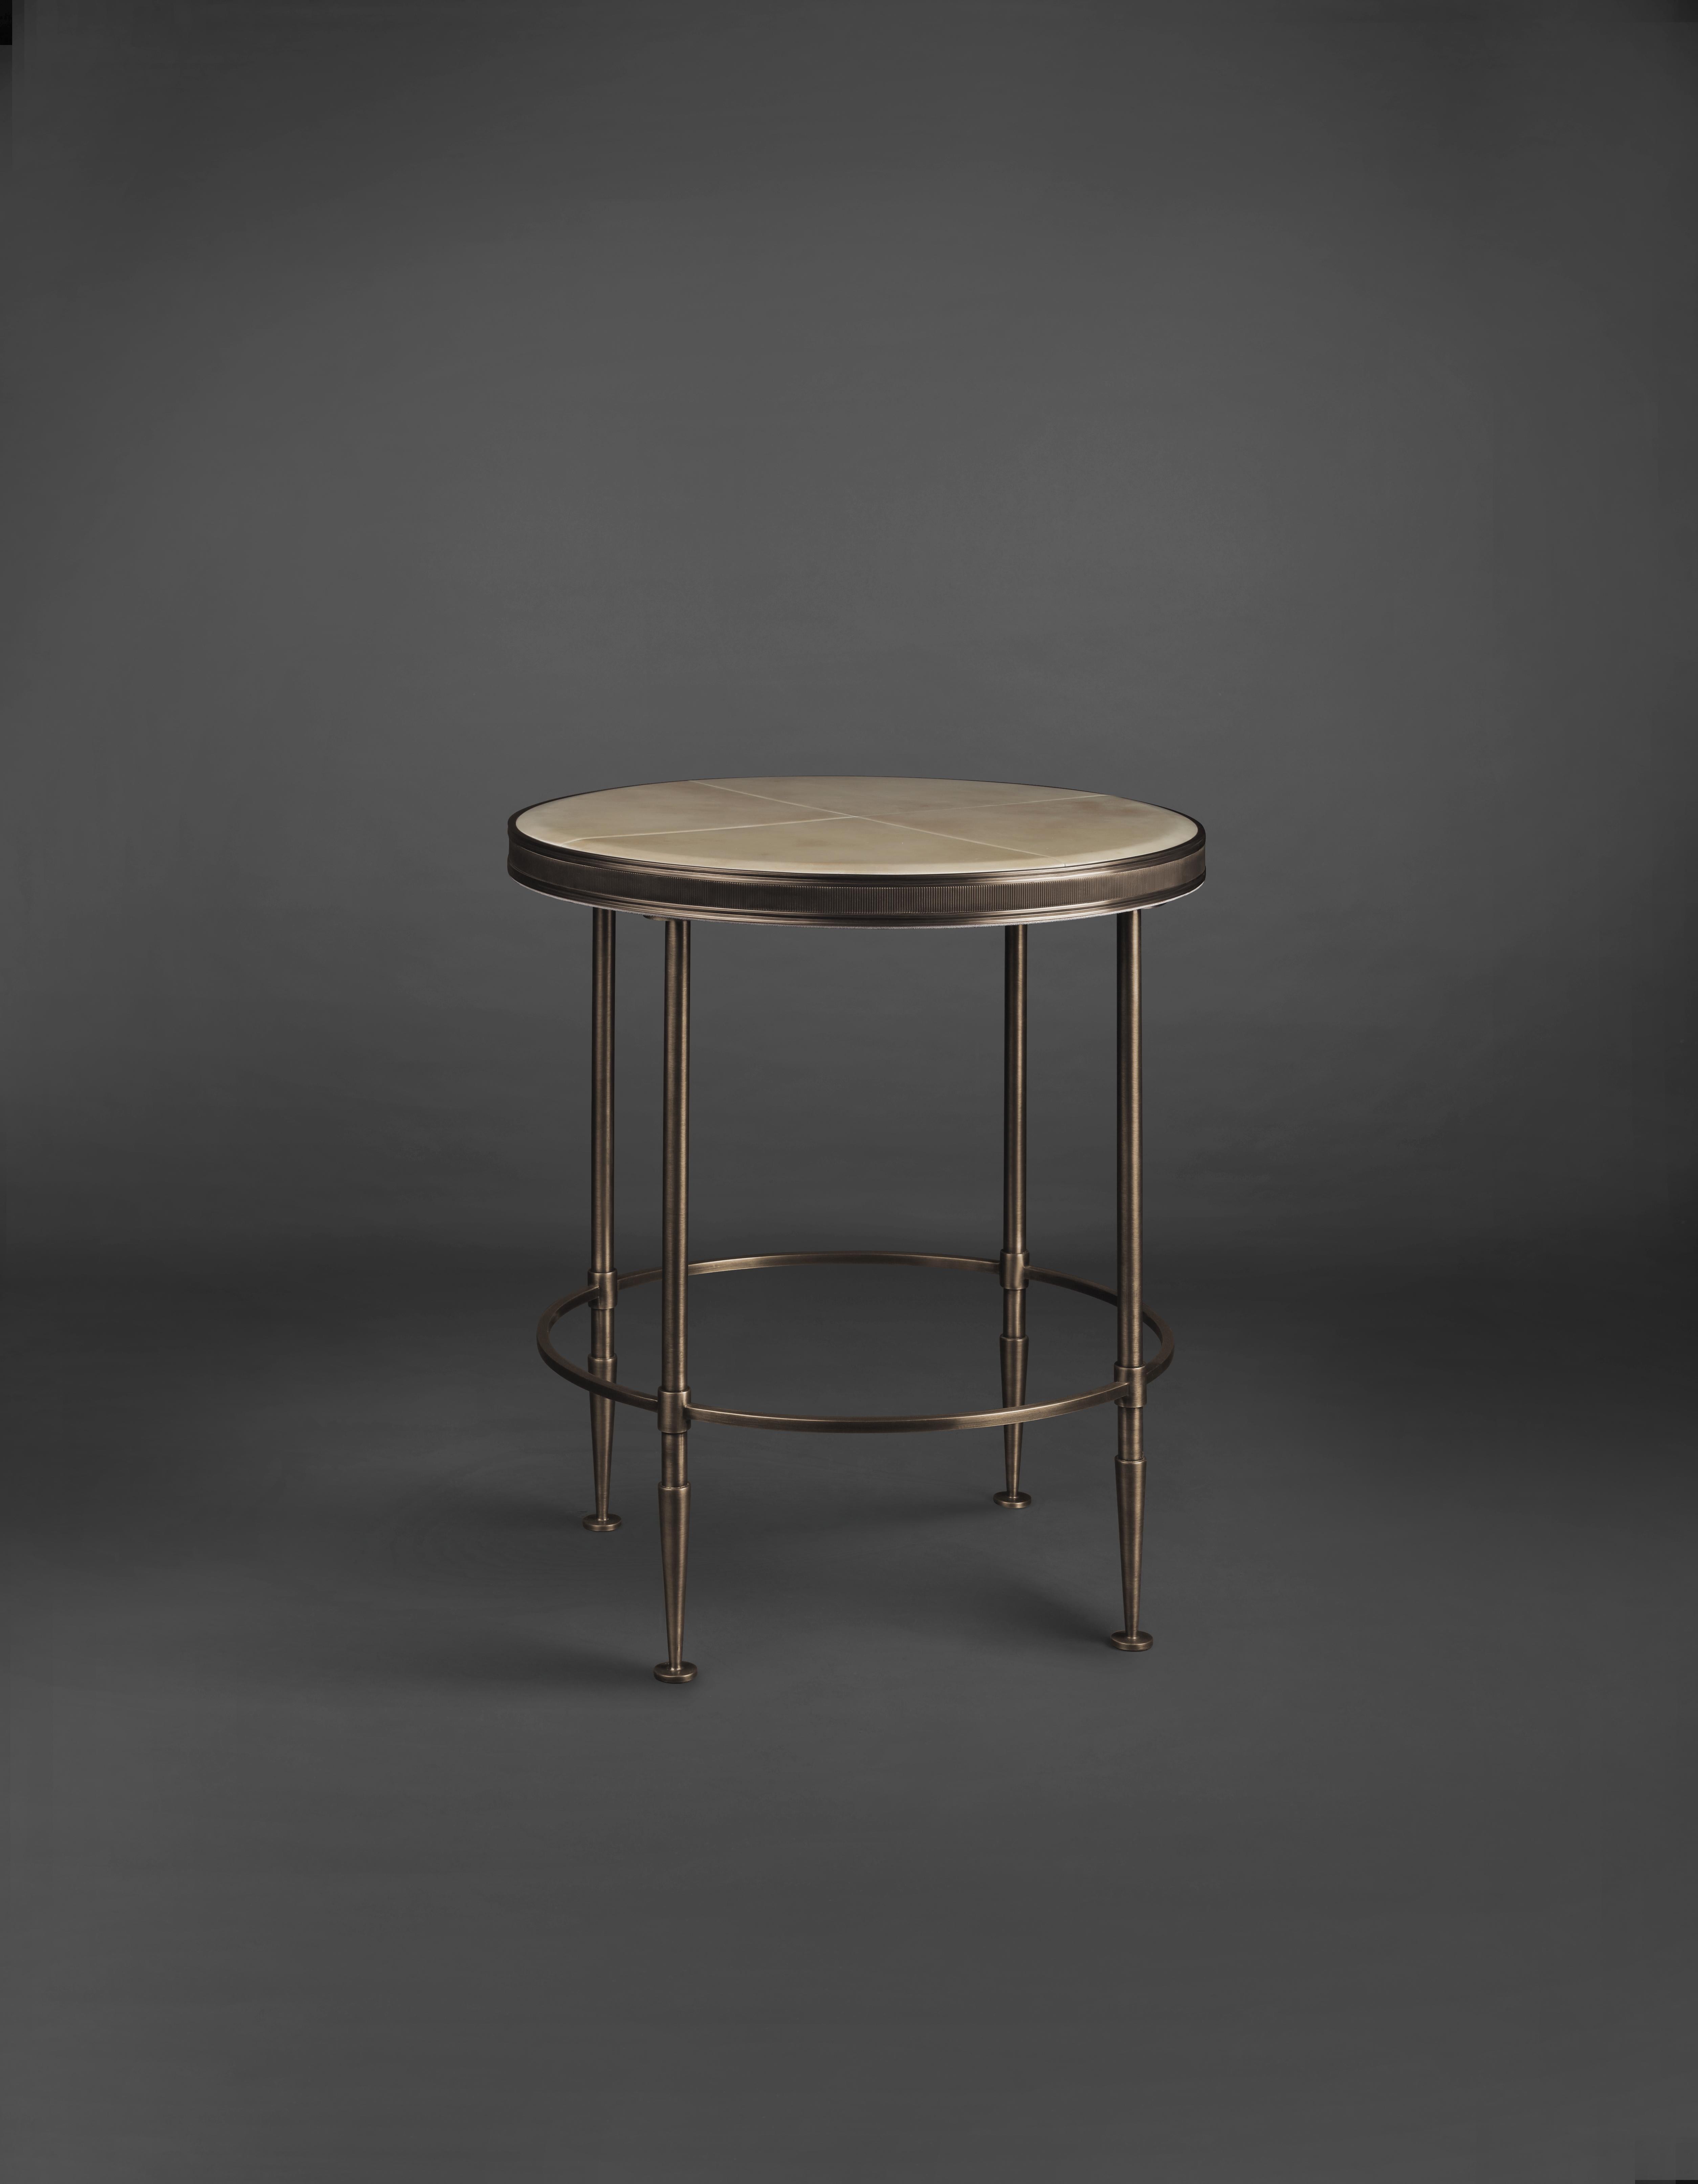 Bronzed finish mandel round table by Madheke
Dimensions: W 55 x D 55 x H 60 cm,
Materials: leather, metal

Bronzed finish framed body with soft edged top of lacquered parchment

Reflecting the finest in craftsmanship, innovation and heritage,